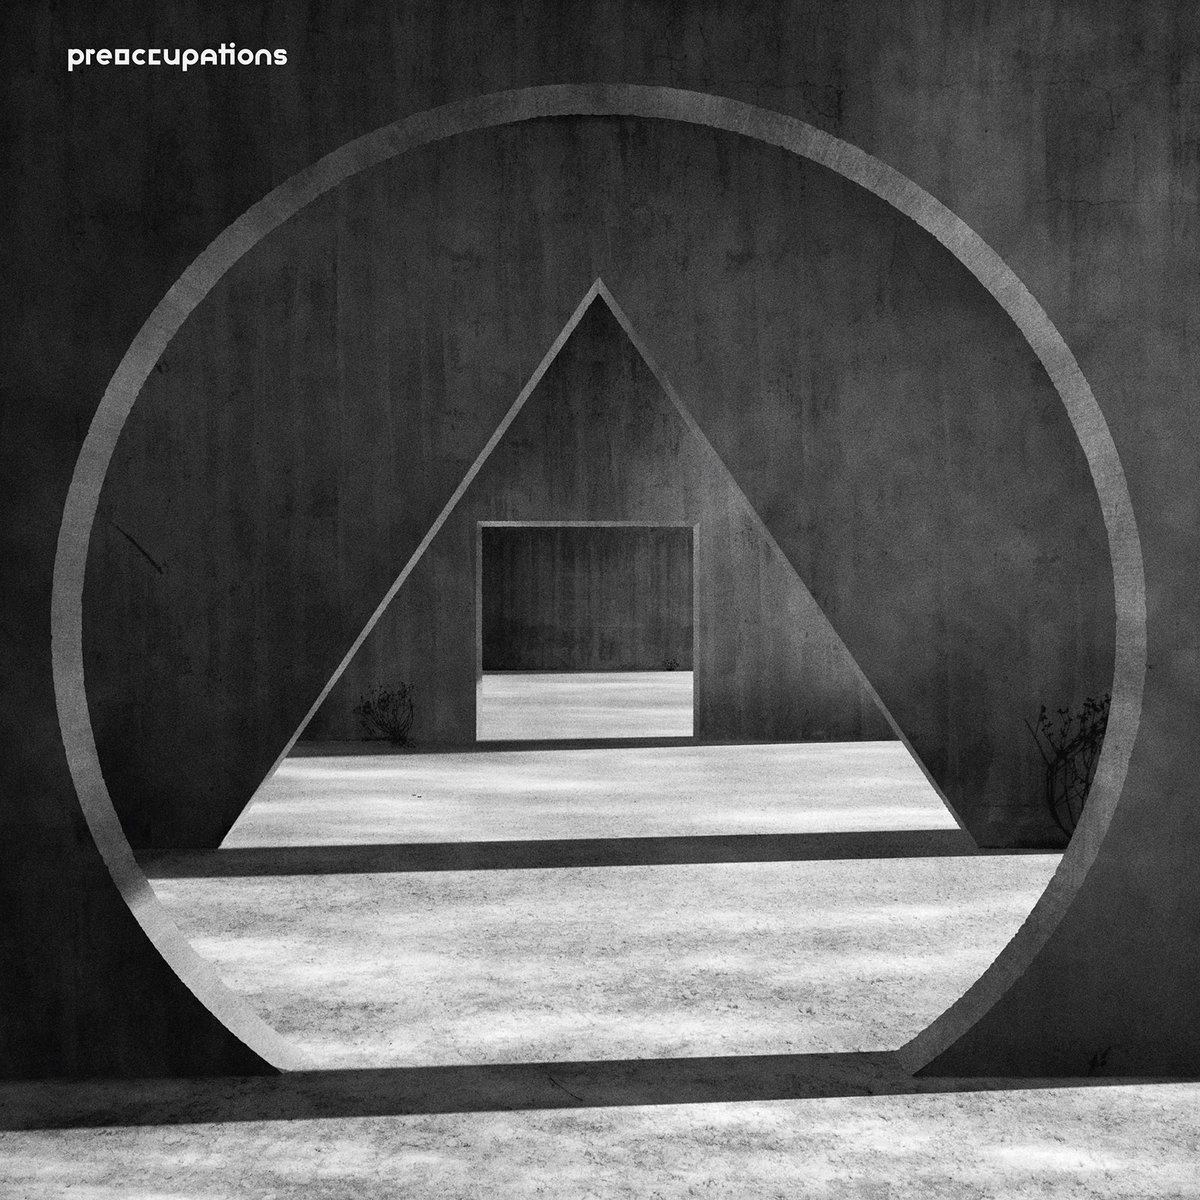 preoccupations